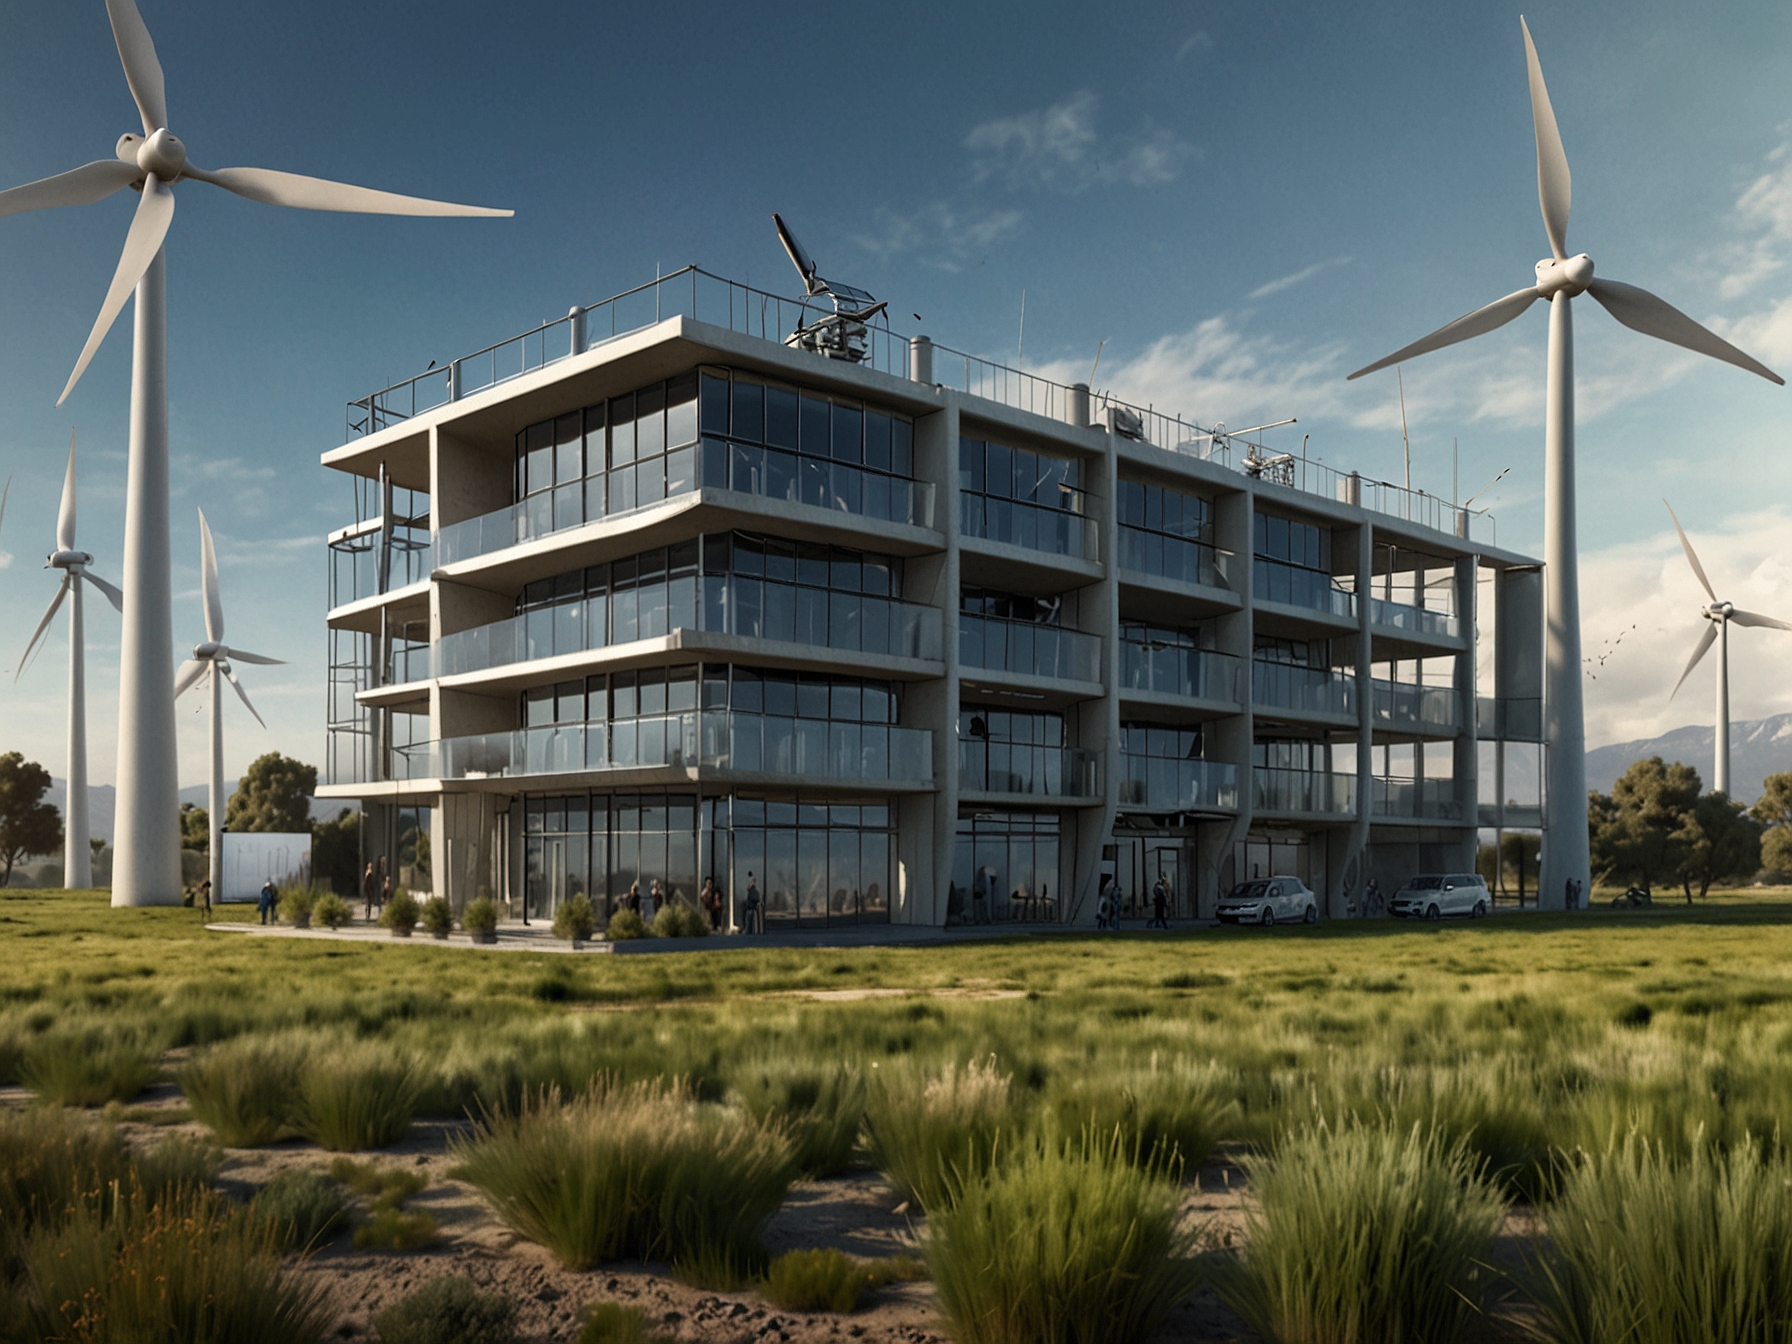 A depiction of Octopus Energy's headquarters with a background of renewable energy sources like wind turbines and solar panels, symbolizing their green energy commitments and acquisition of Bulb.